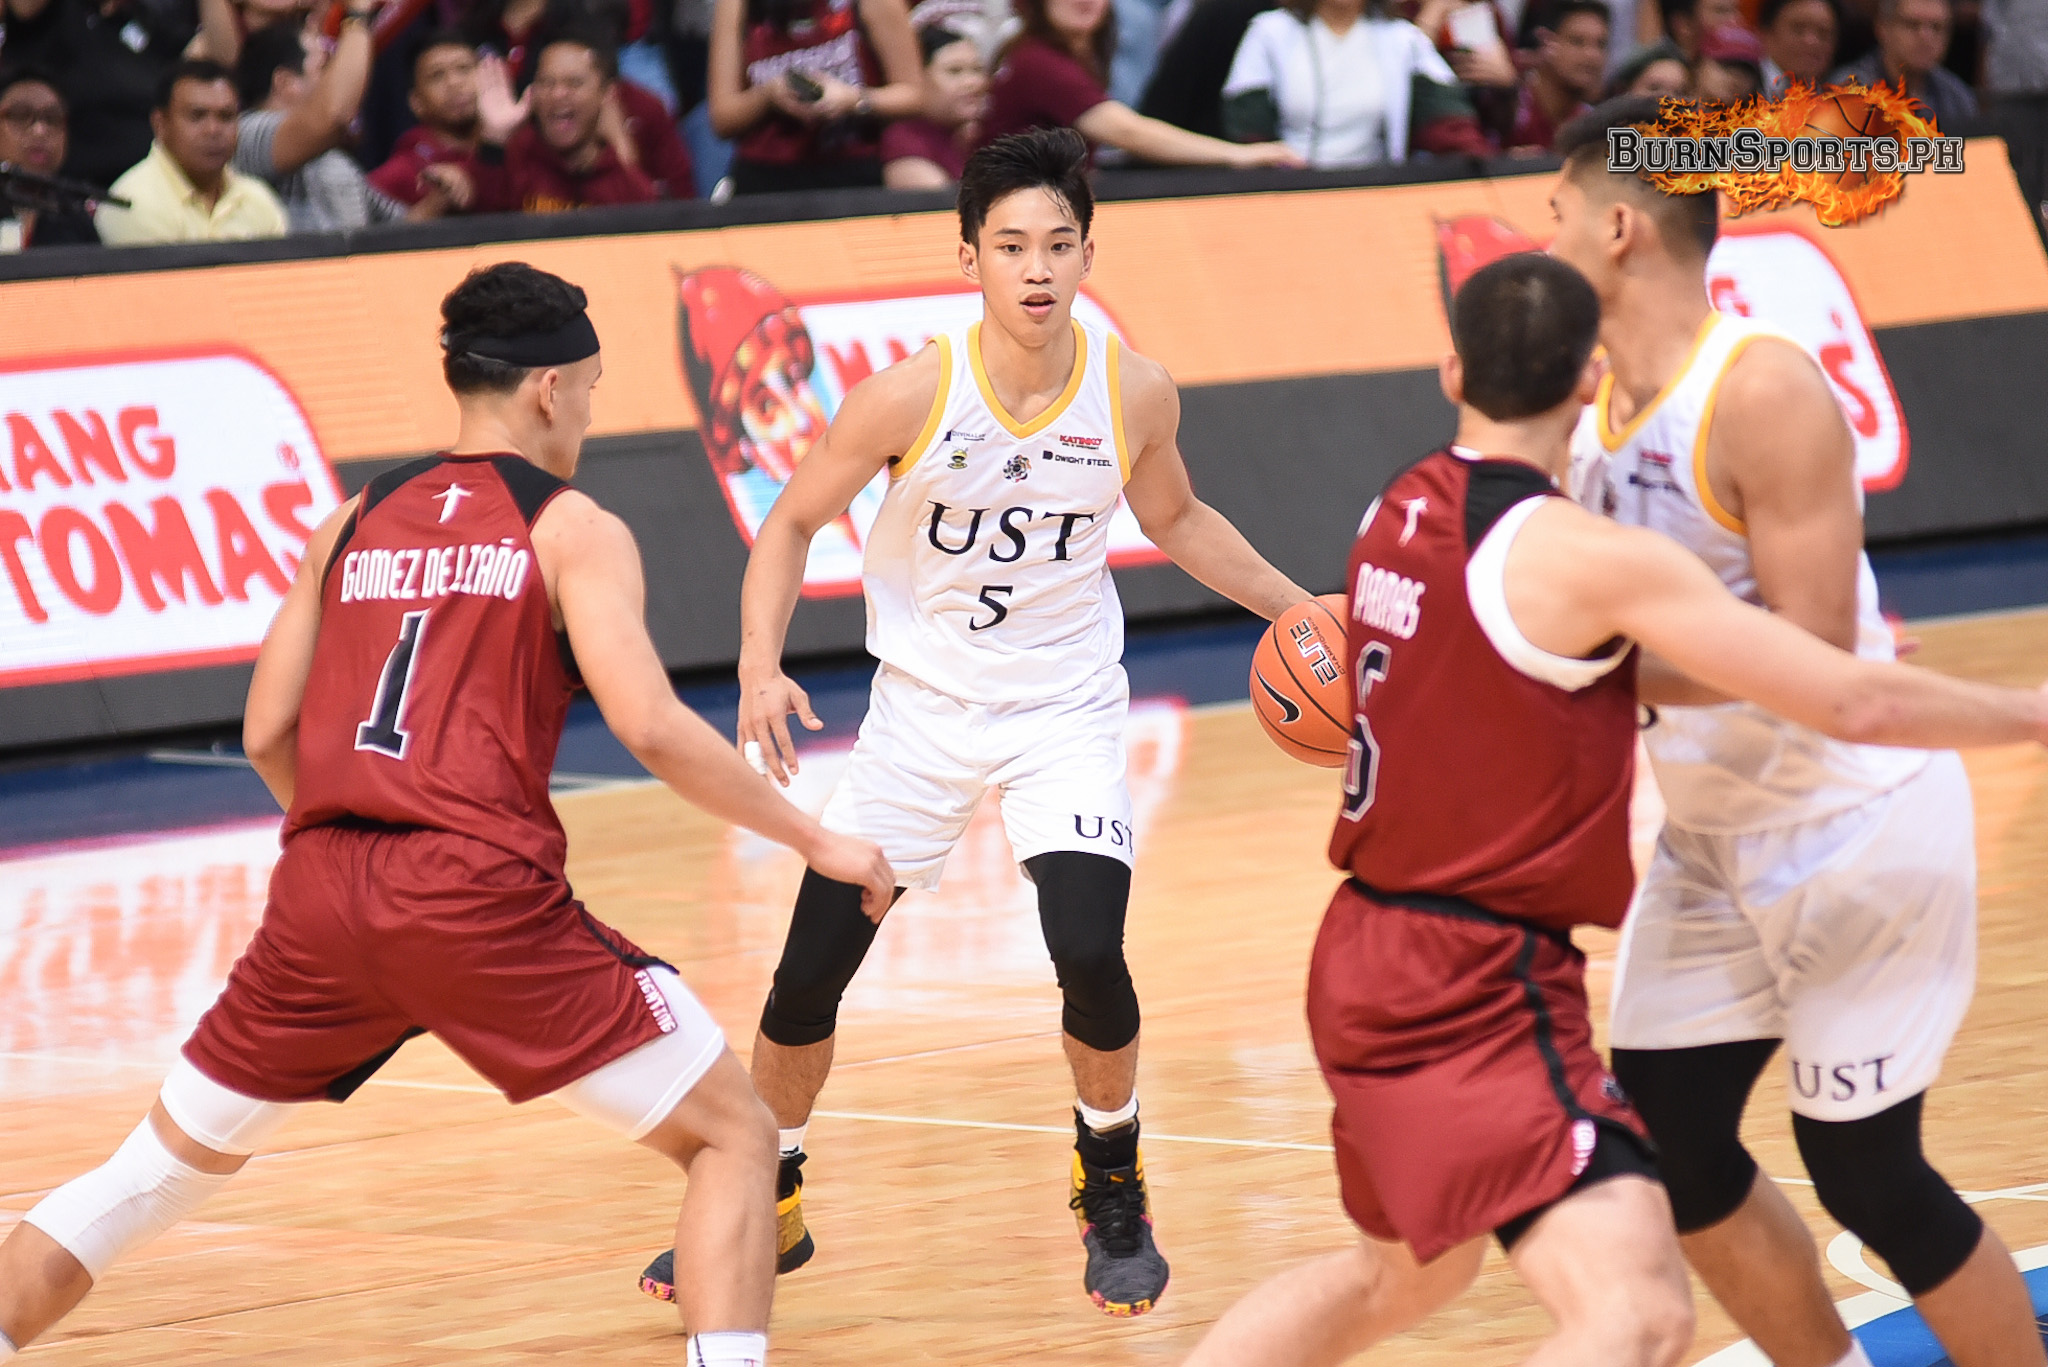 UST ousts UP in thriller, sets up finals clash with Ateneo